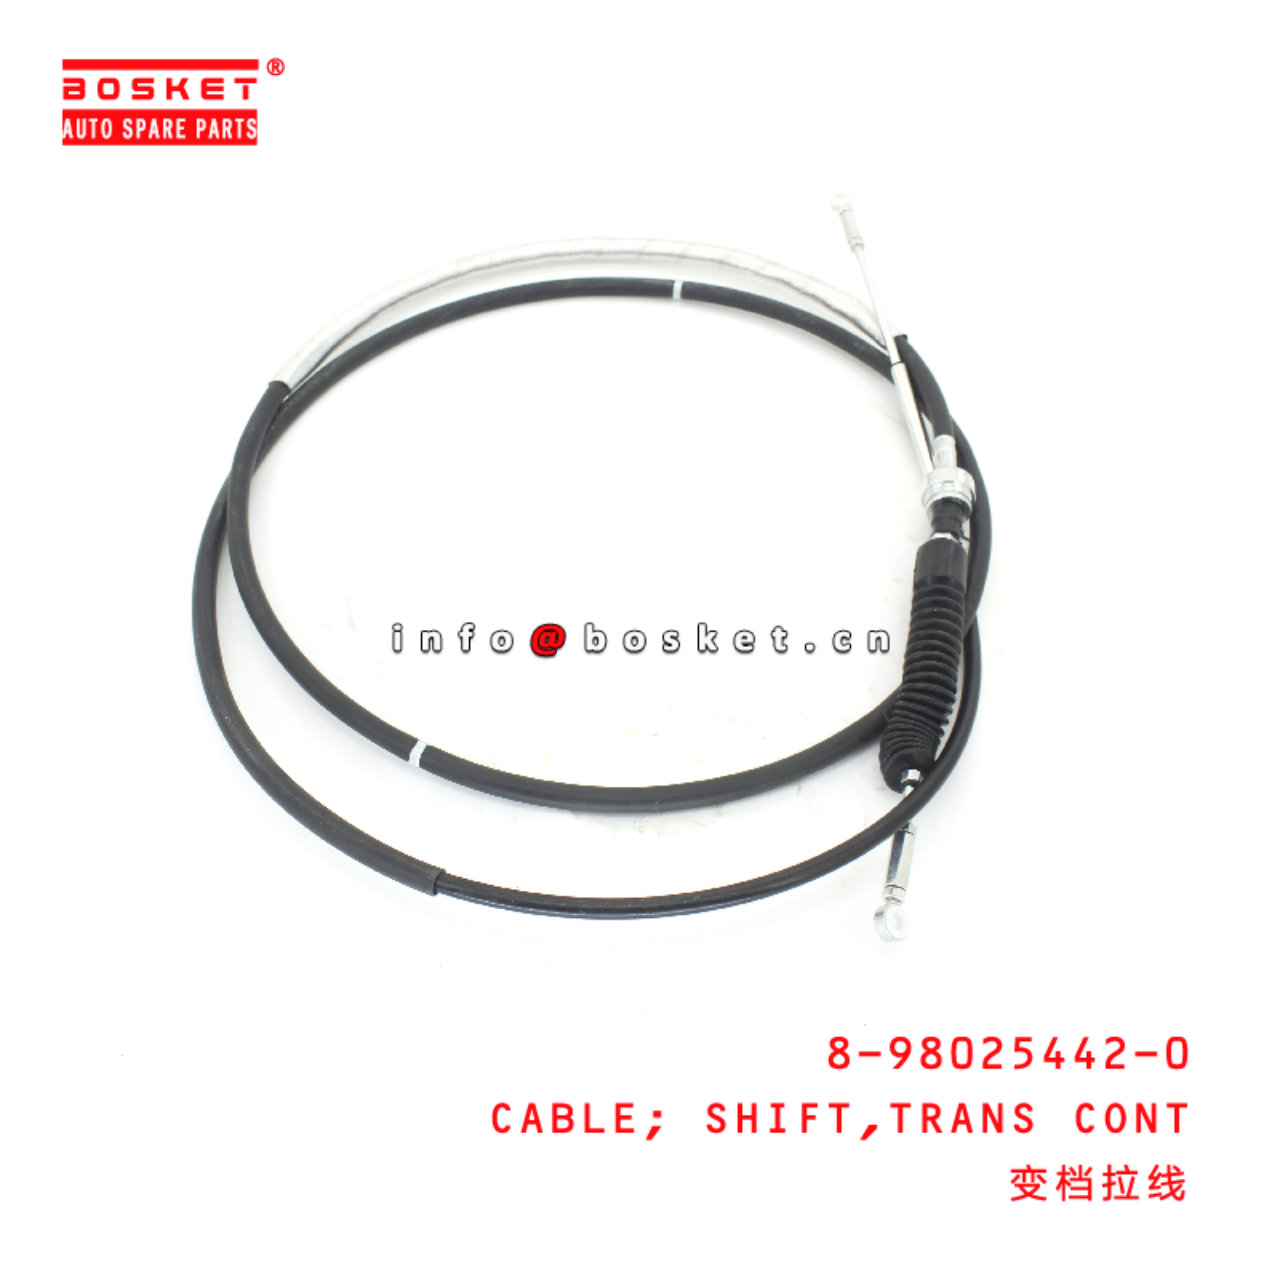 8-98025442-0 TRANSMISSION CONTROL SHIFT CABLE suitable for ISUZU   8980254420